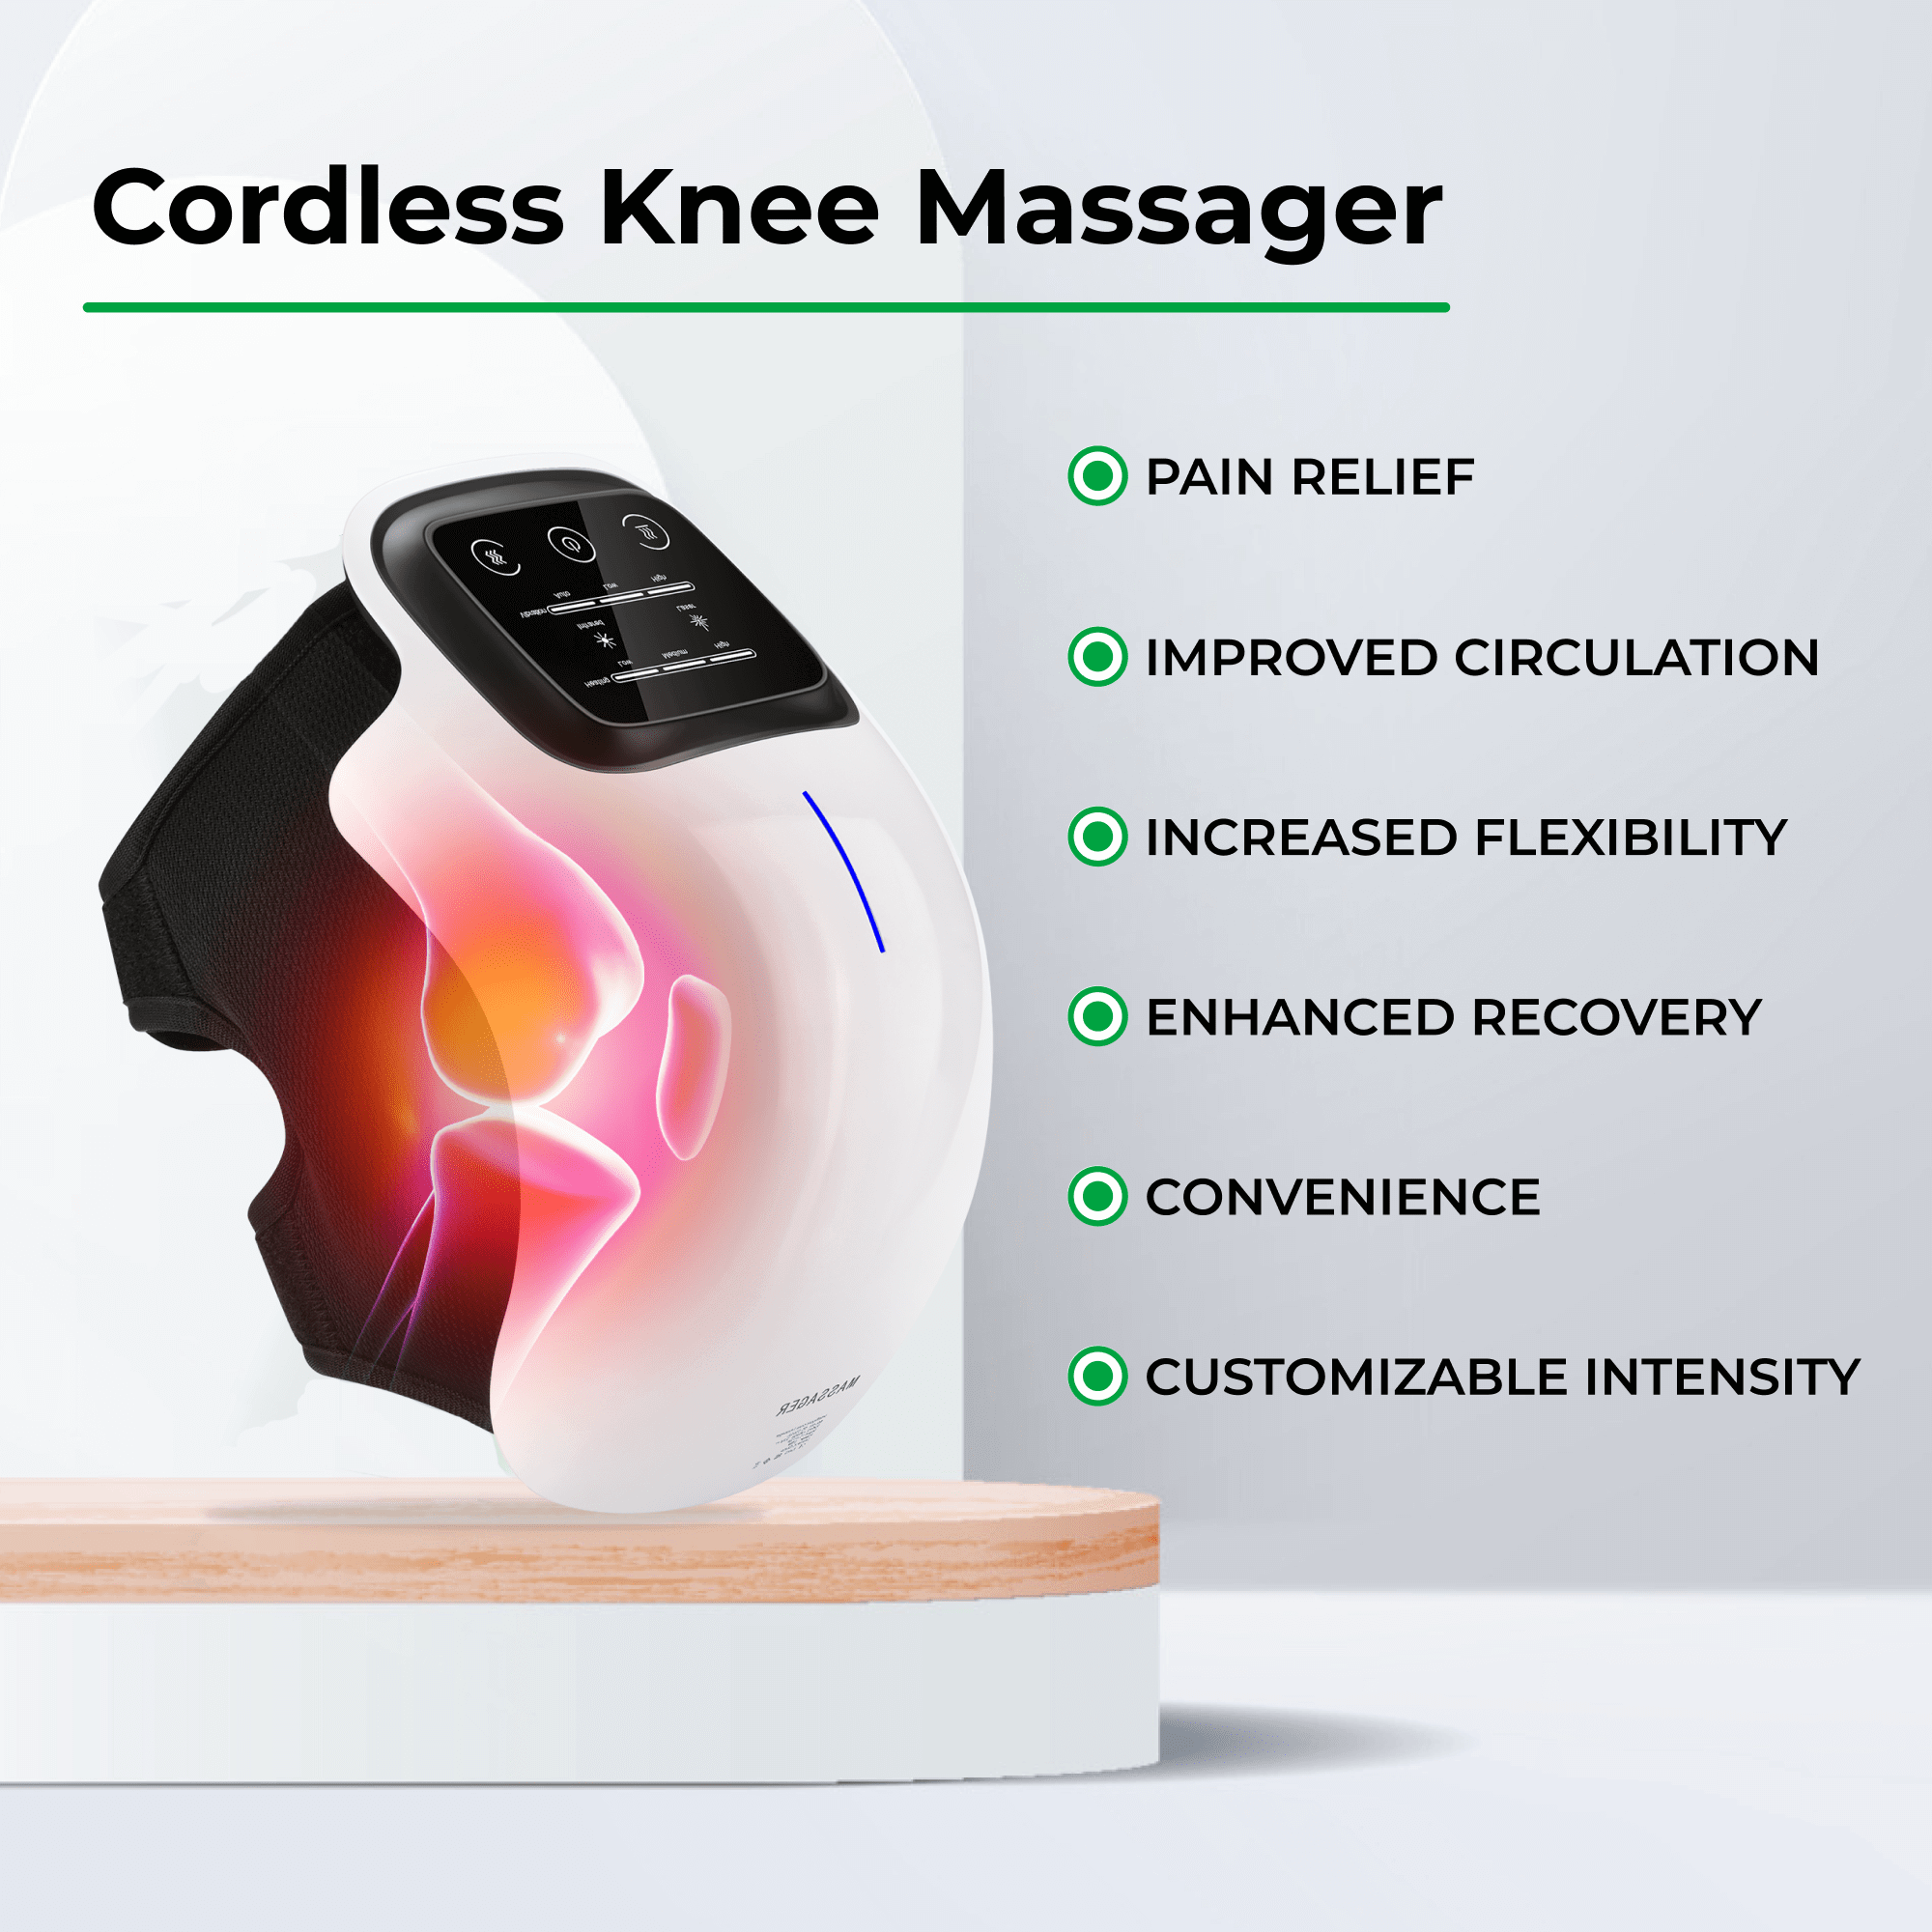 Heated Knee Massager For Pain Relief - Vibration Knee Massager for